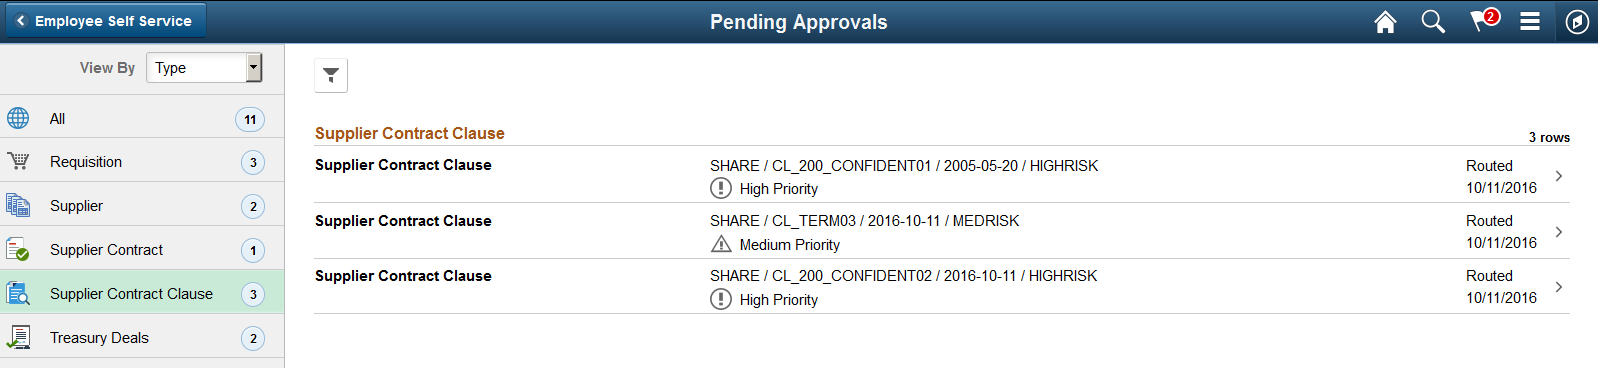 Pending Approvals - Supplier Contract Clause (List) page